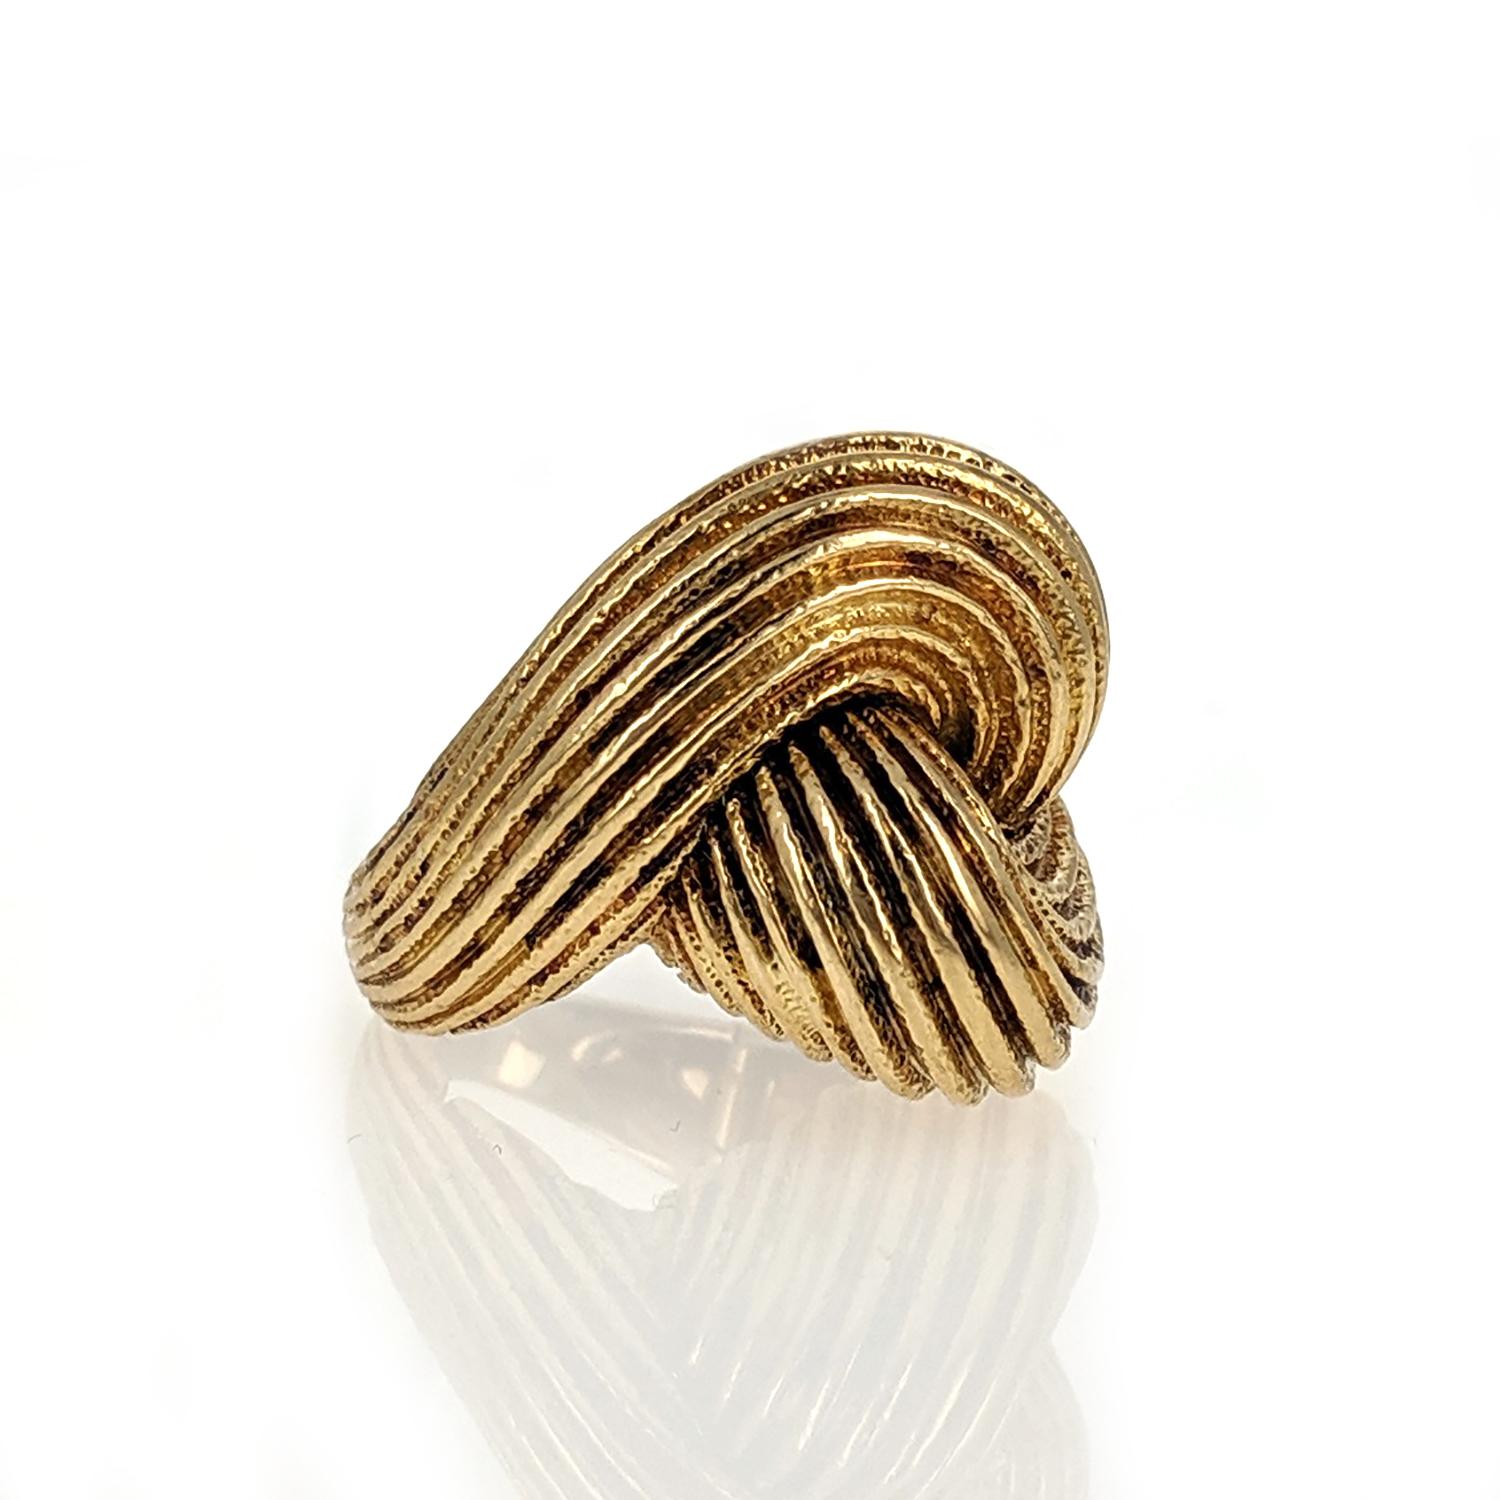 A voluptuously organic knot form in fluted 18k yellow gold. Signed Webb for David Webb. 
A very secure deployment clasp was incorporated into the design to likely accommodate a larger knuckle. Considering the ring carries its weight on the knot